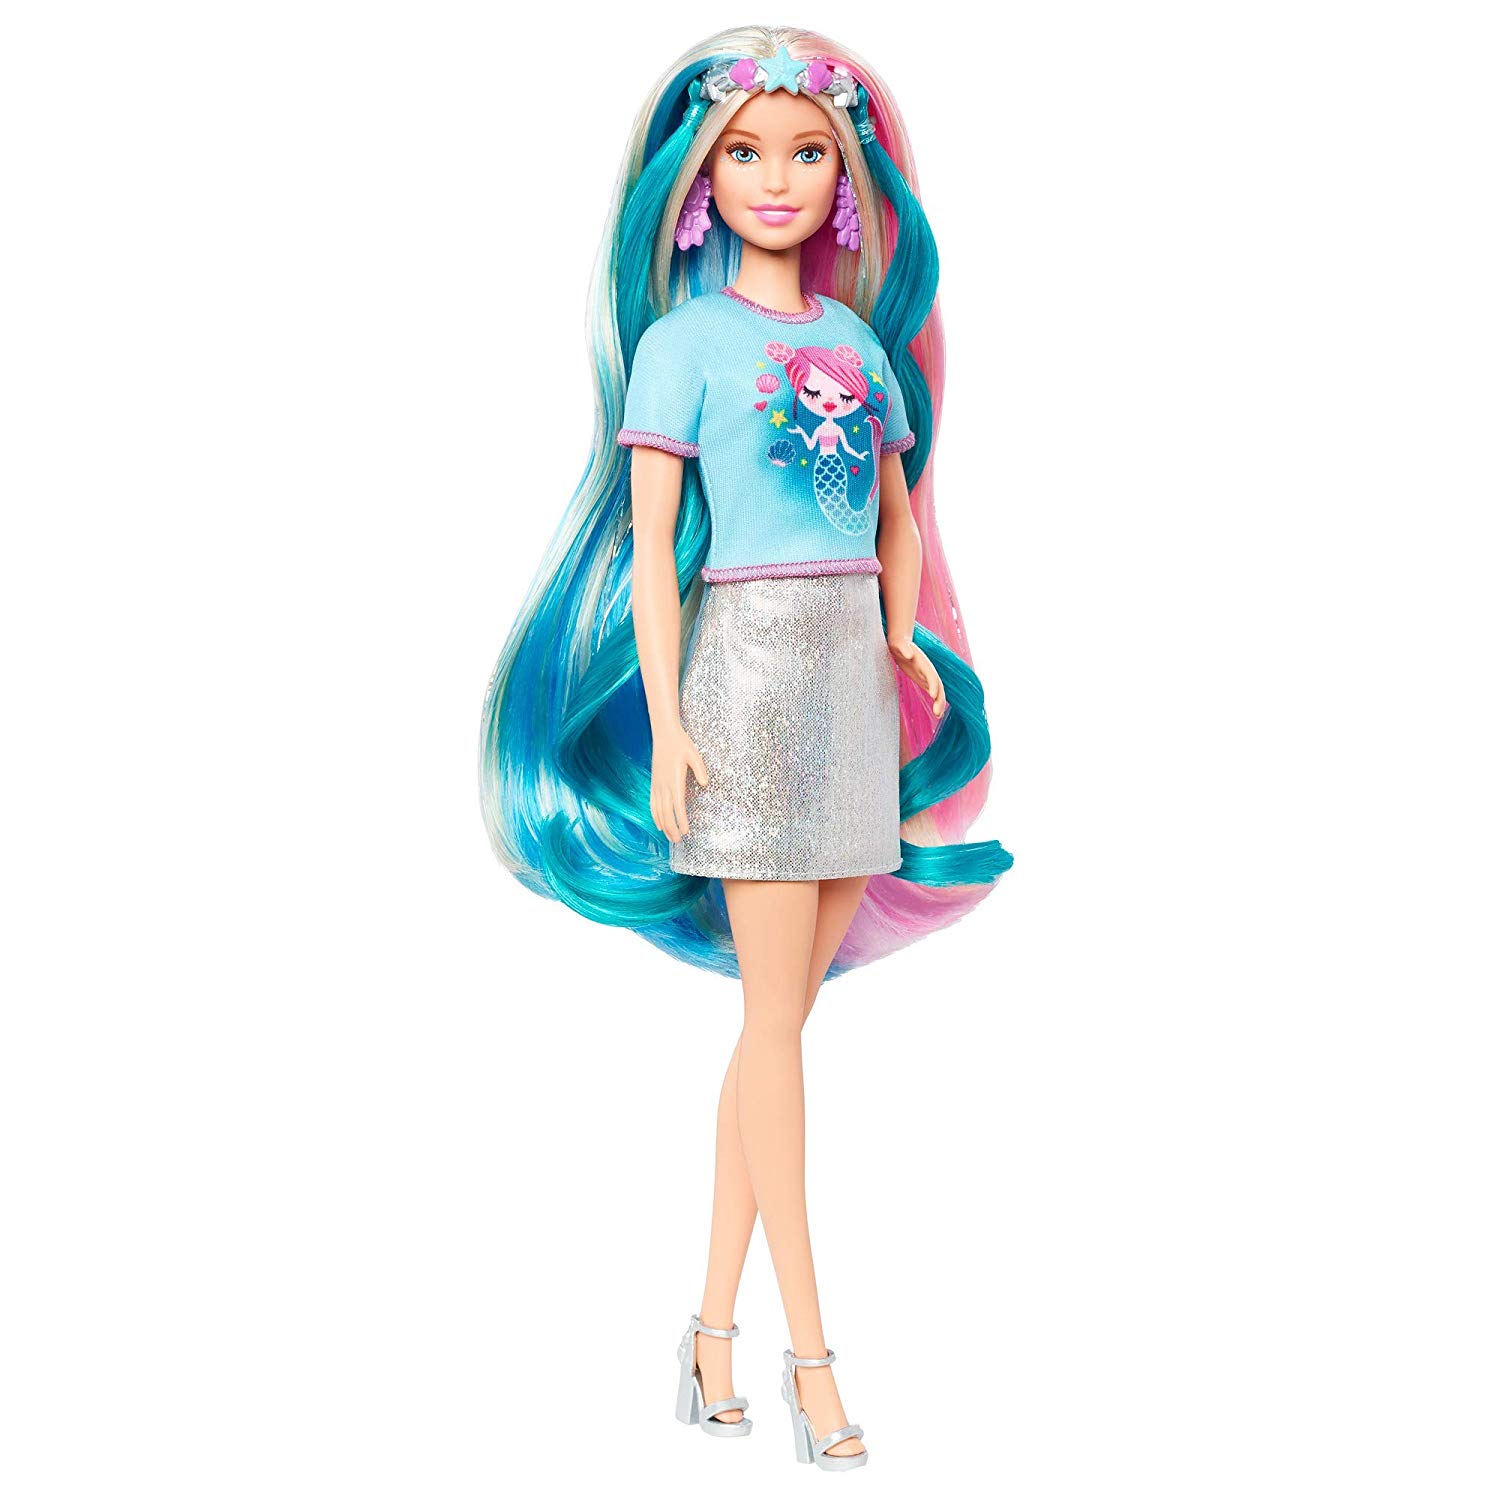 Barbie Fantasy Hair - new hair themed Barbie with Mermaid crown and ...